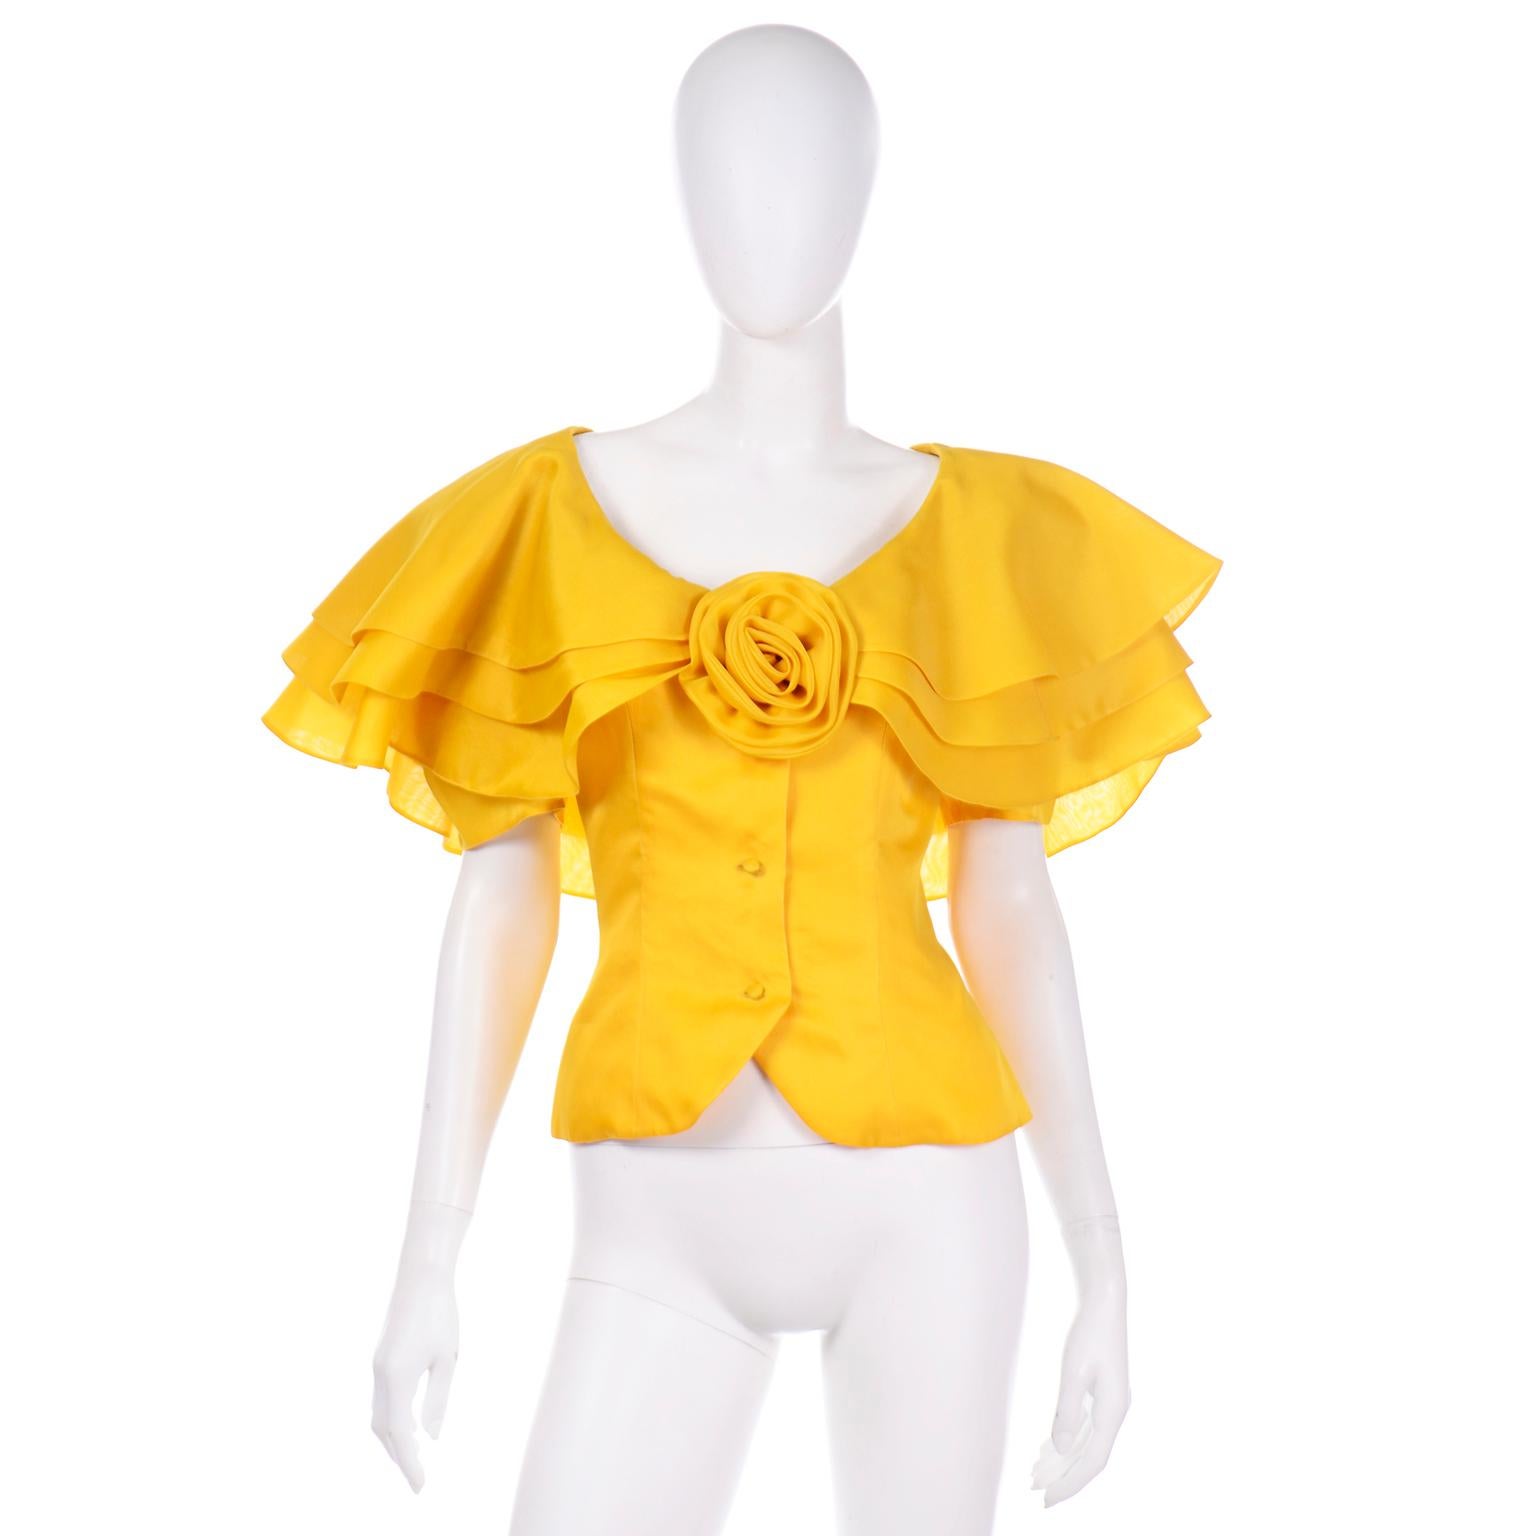 This incredible vintage Raoul Arango Saks Fifth Avenue Yellow Silk Floral Ruffled Blouse still has its original Saks Fifth Avenue tag for $1095 attached. The top is in a marigold yellow silk organza and the sleeves are made of layers of ruffles. We